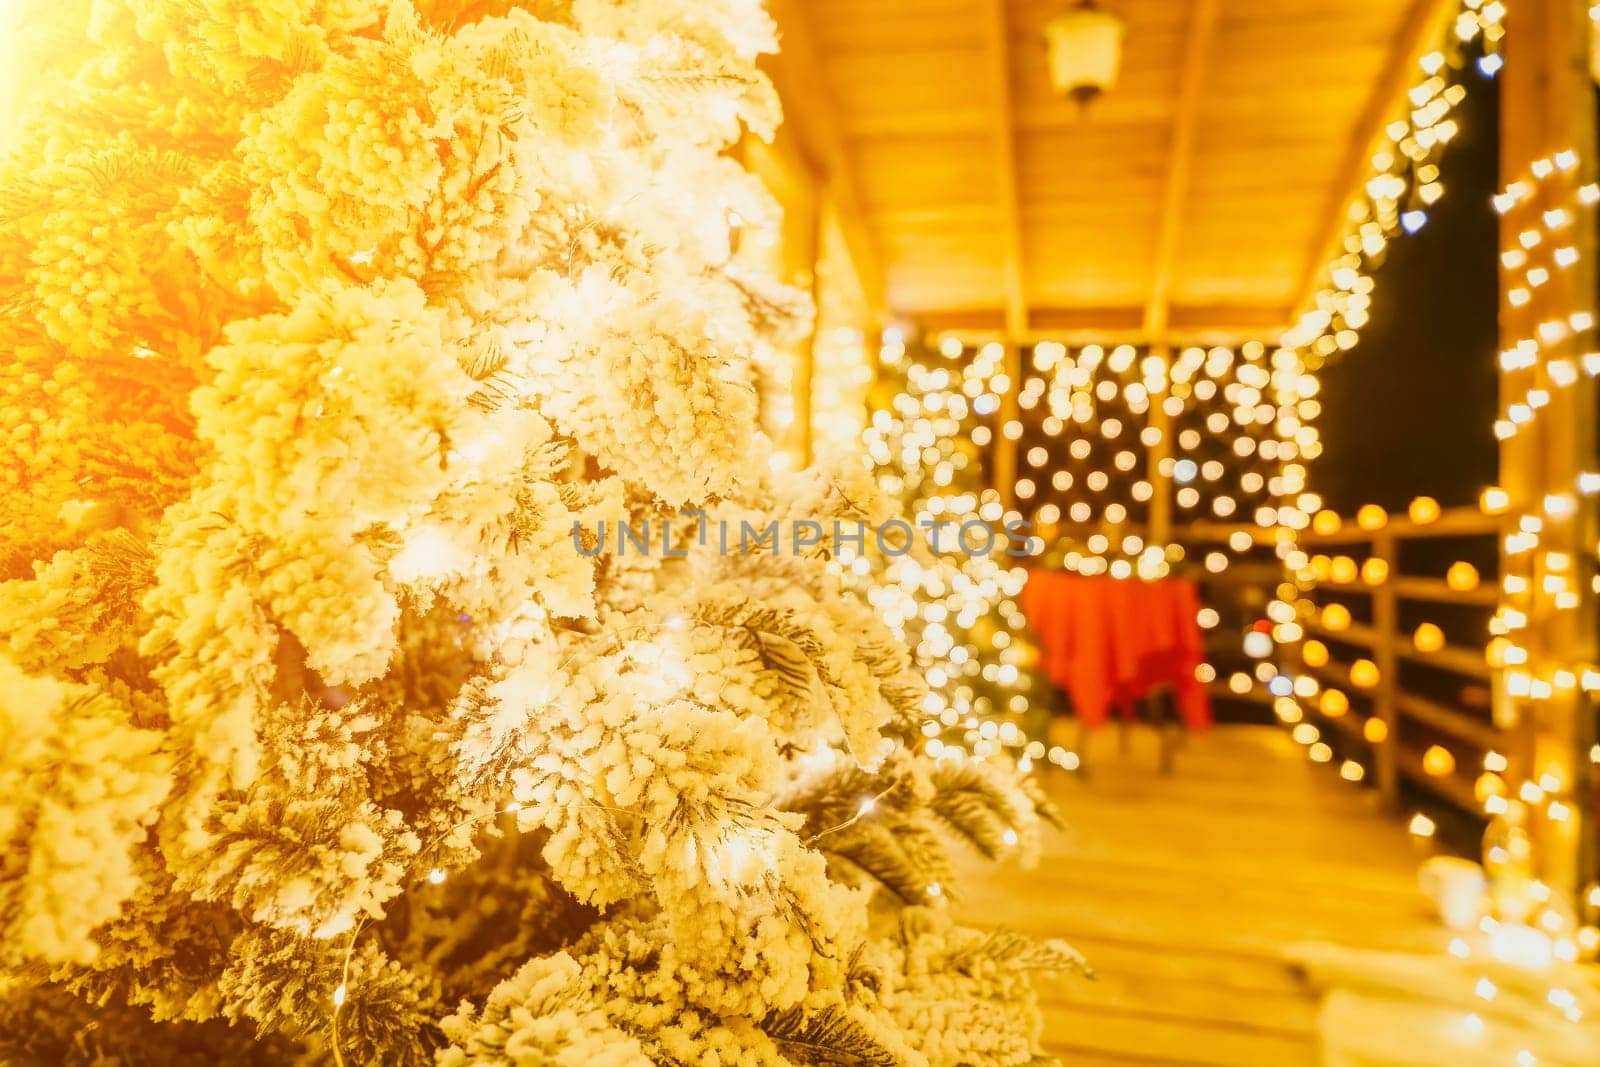 Snow-covered Christmas tree with bright white lights situated outdoors near a building, a welcoming festive moment. by panophotograph